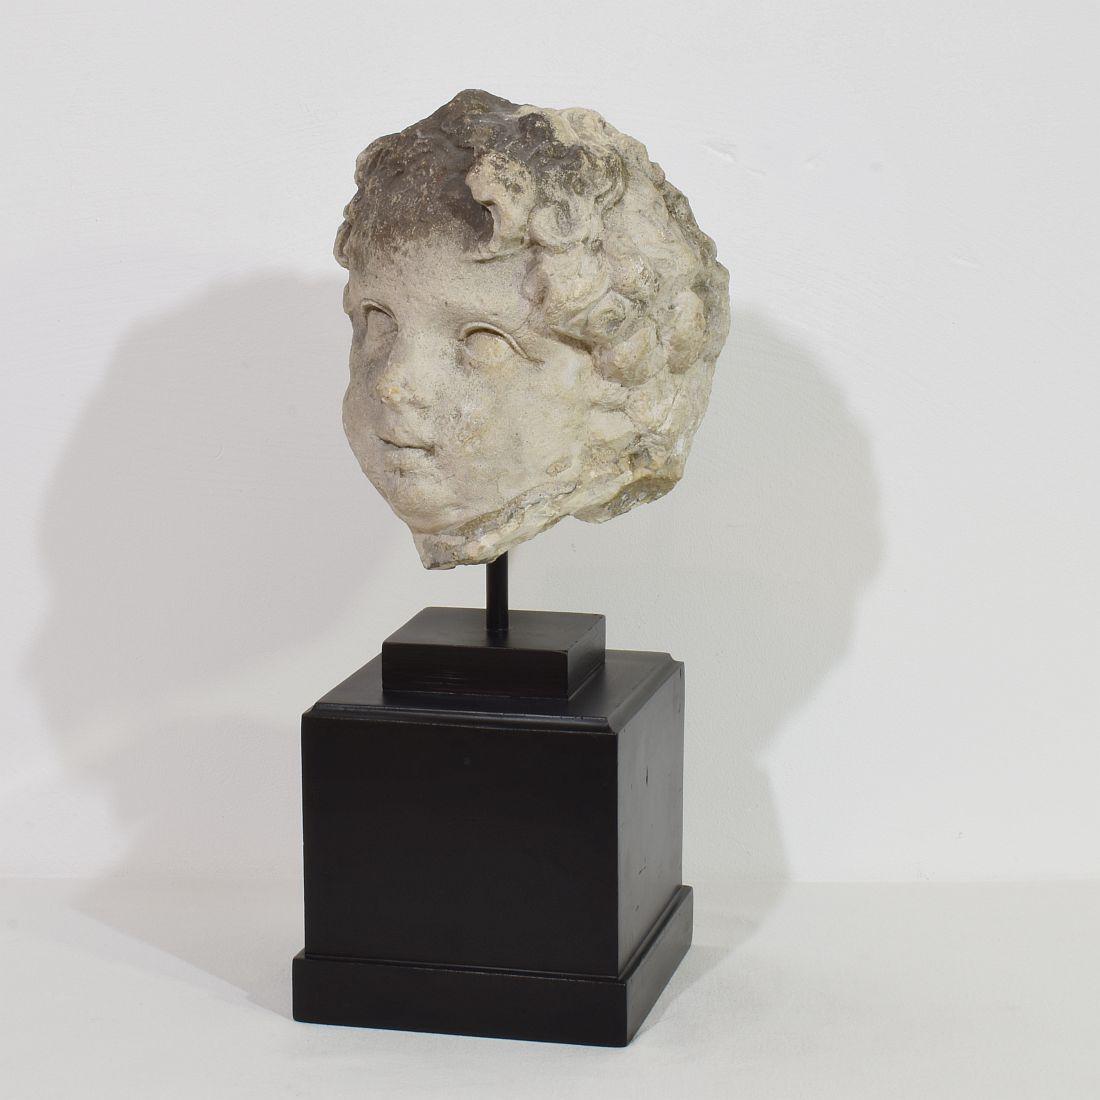 Amazing and large handcarved limestone head with a stunning weathered look. Unique period piece from the 17th century now placed on a wooden pedestal.
France circa 1600-1700. Weathered.
Measurements include the wooden base. Height of the head